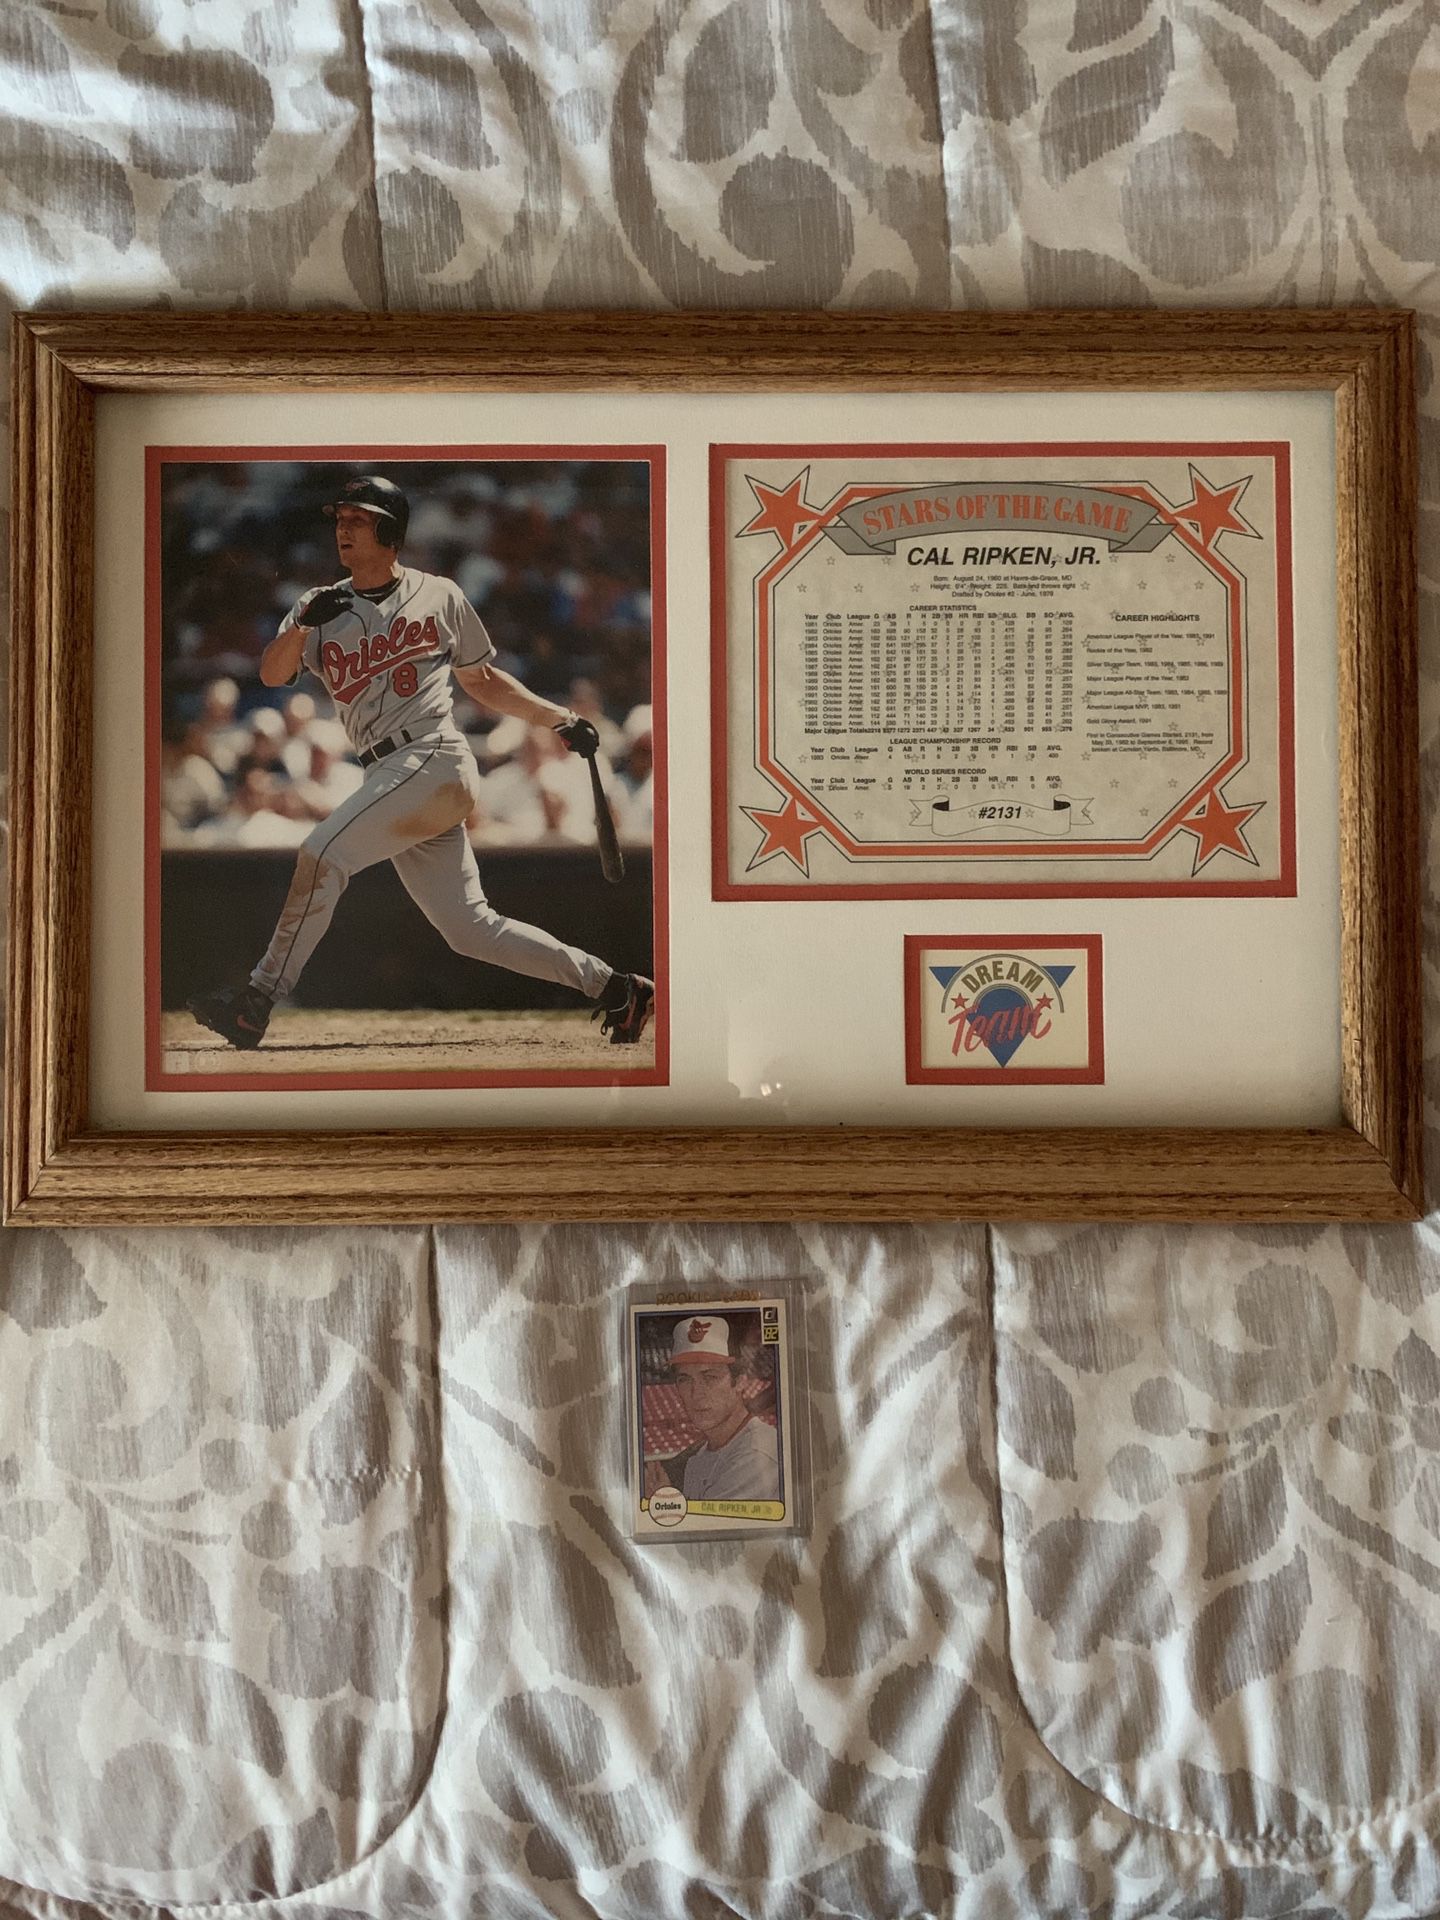 Cal Ripken Framed picture and roomie card